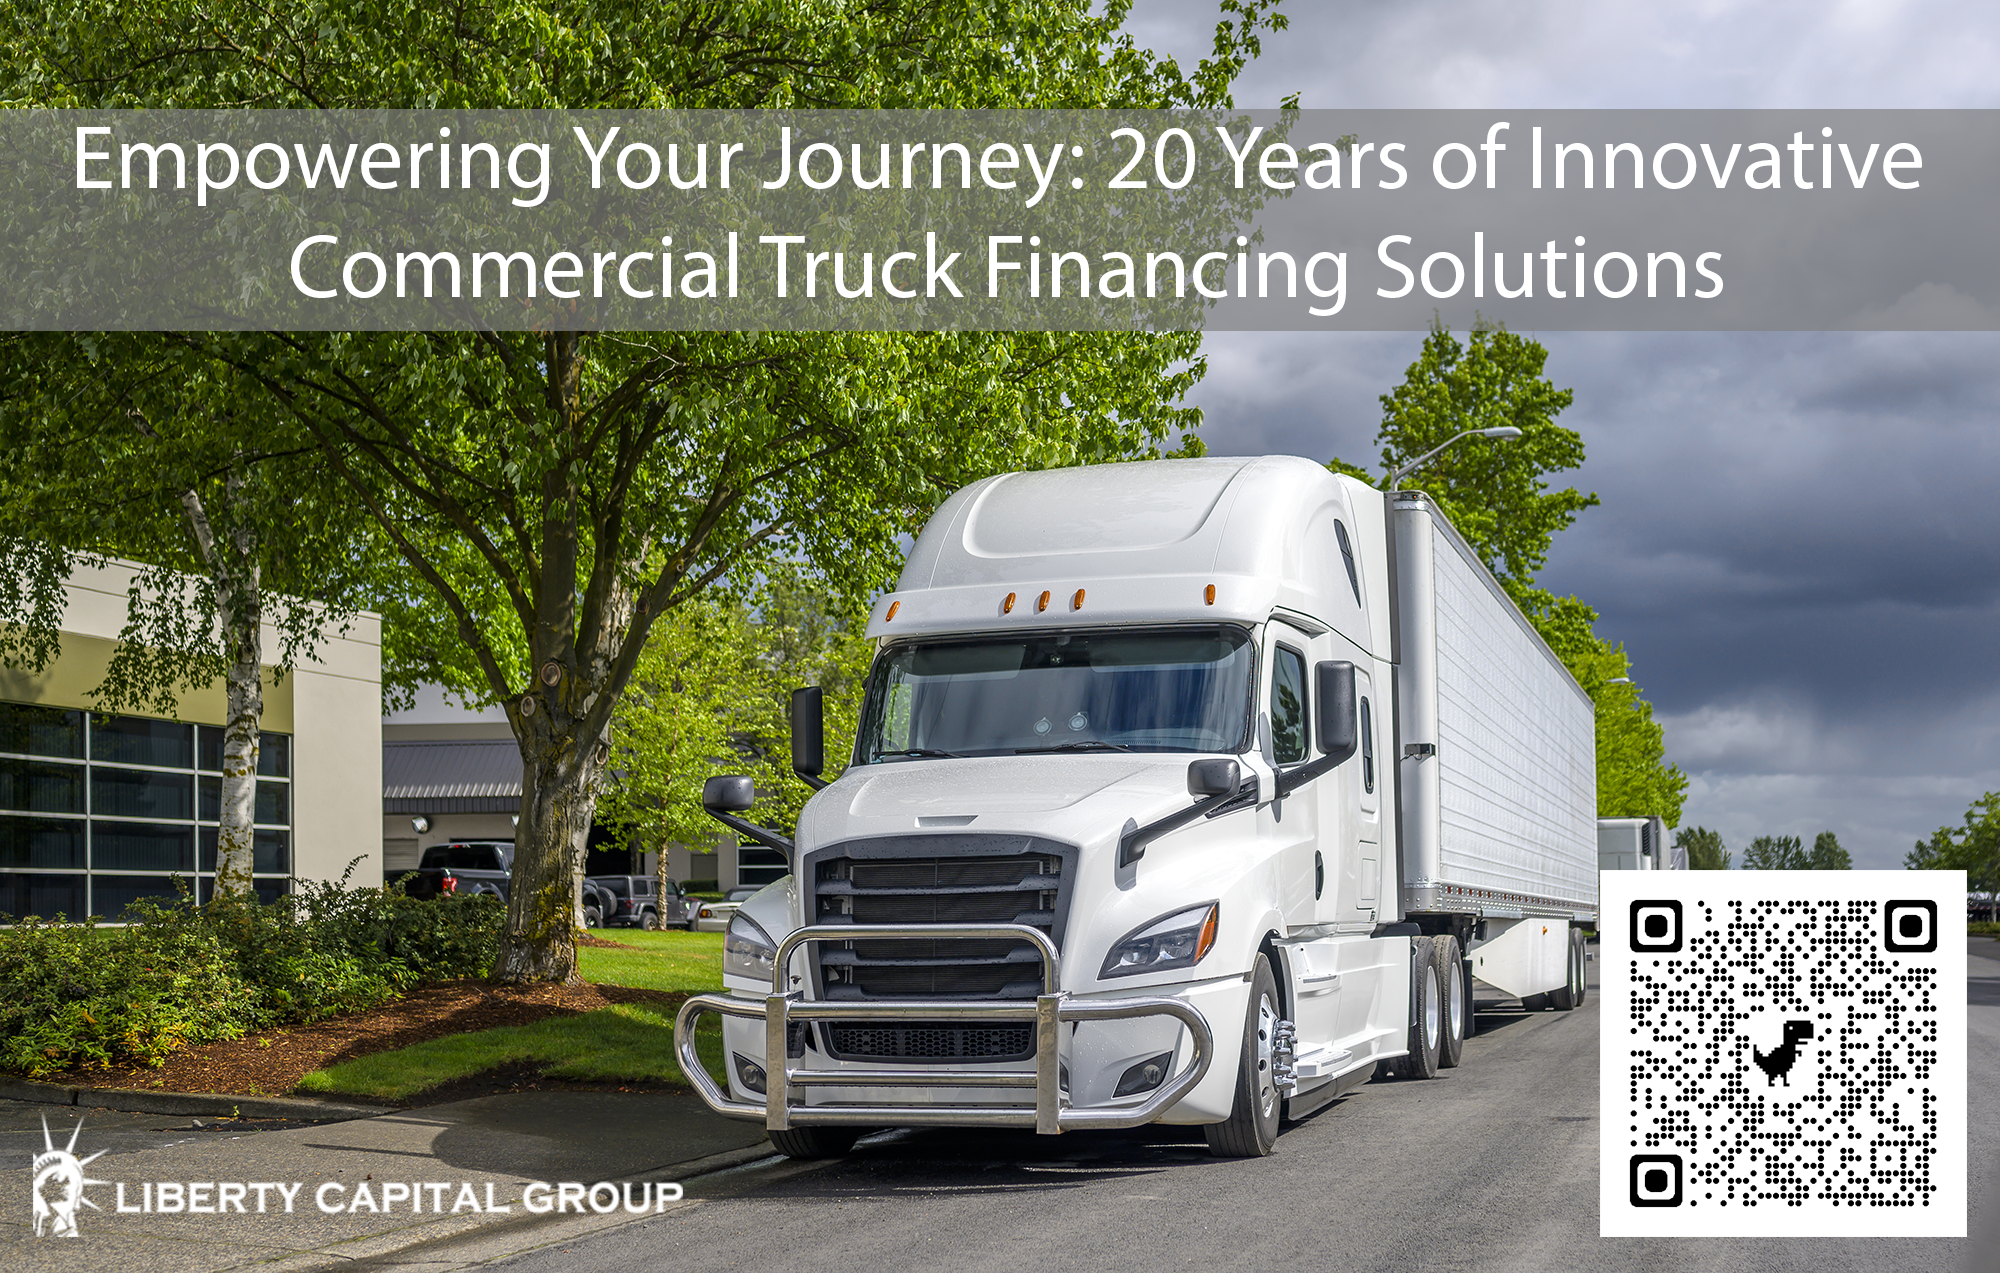 Commercial Truck Financing Solutions